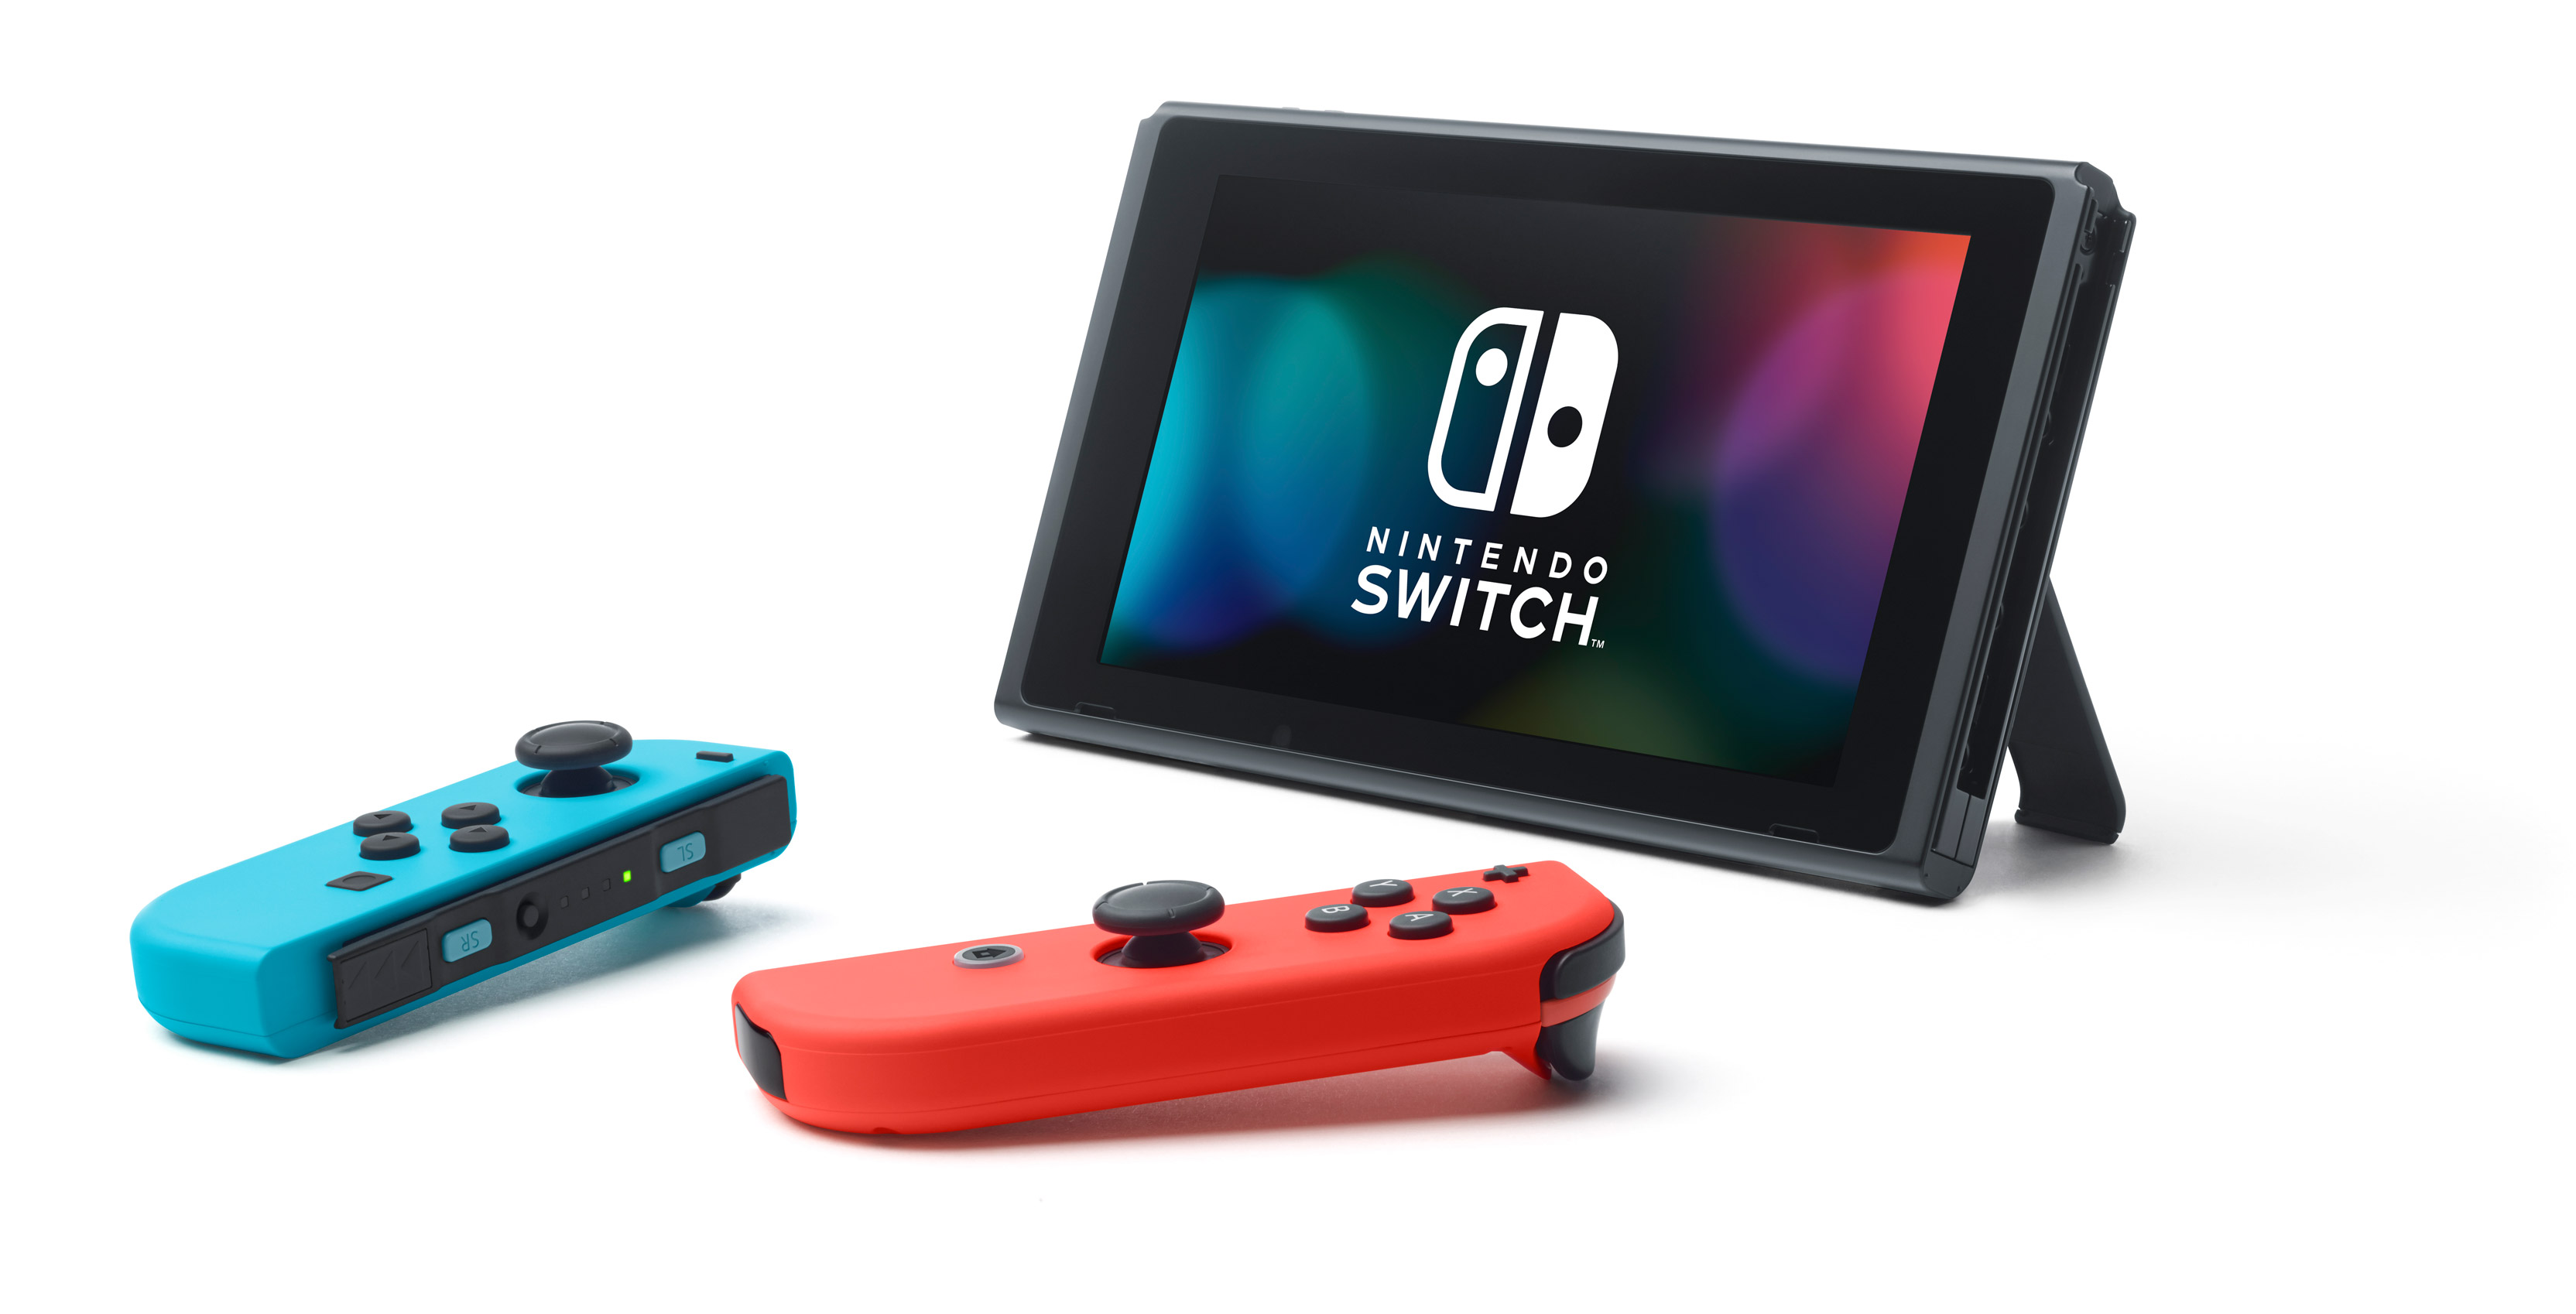 video streaming on nintendo switch